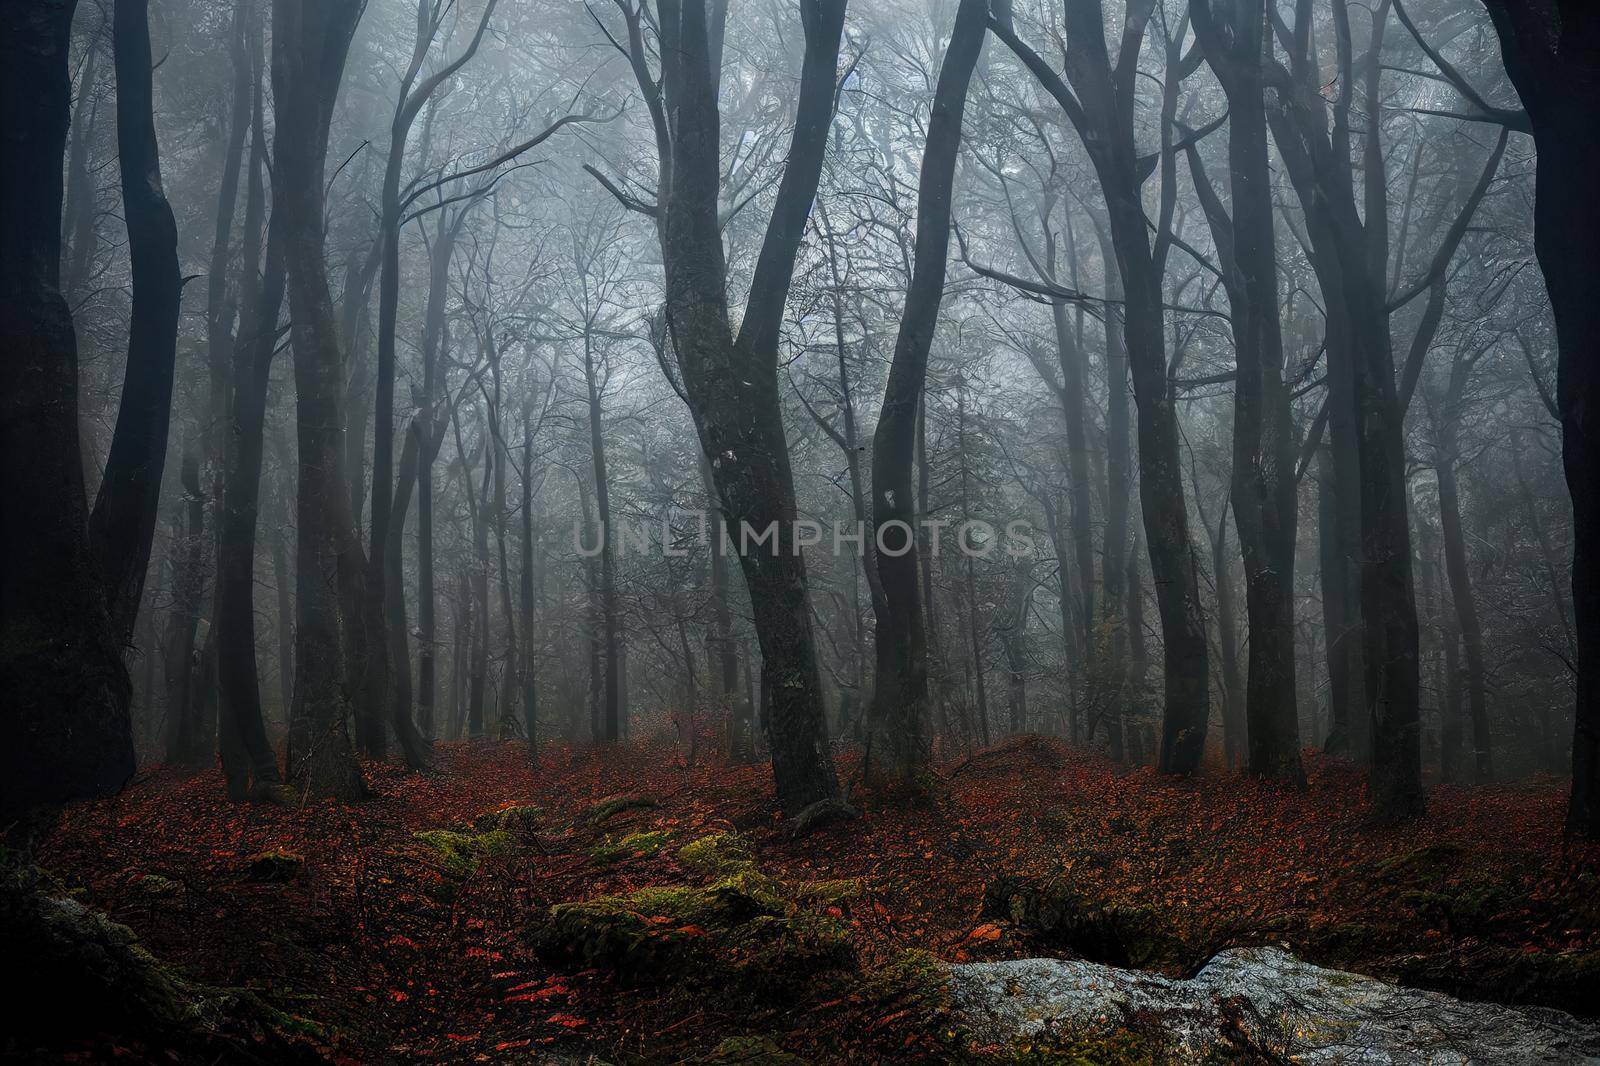 mystical landscape in the beech forest with few leaves shrouded in dense fog in the cold season. High quality illustration